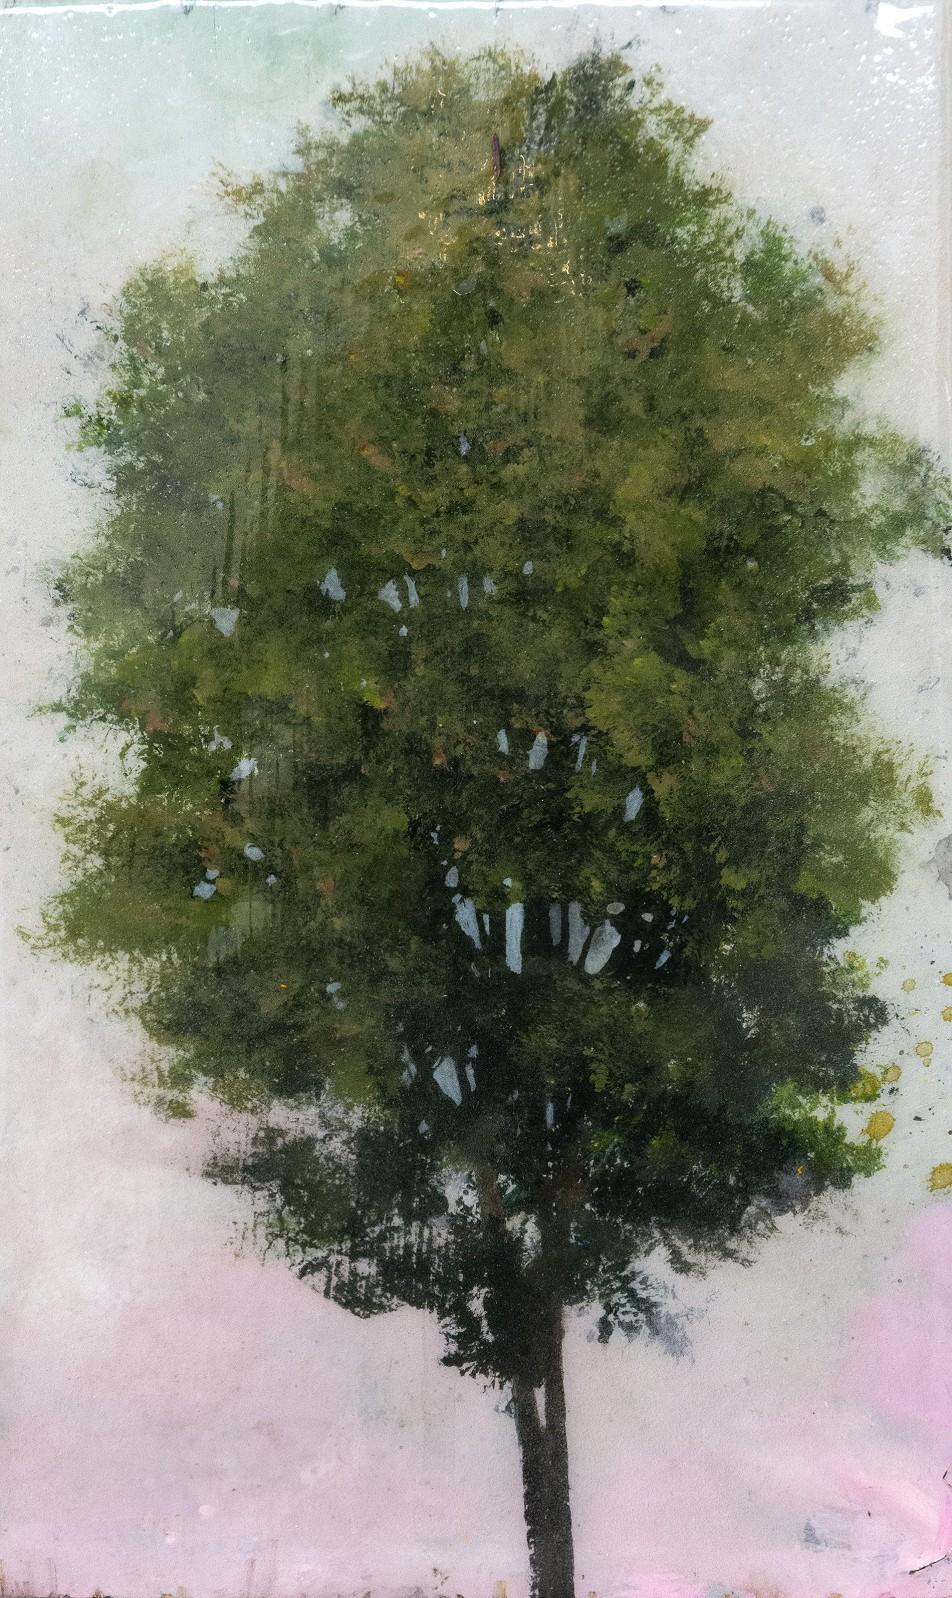 Peter Hoffer Landscape Painting - Tree Portrait 20207 - small, green, pink, figurative, acrylic on panel series